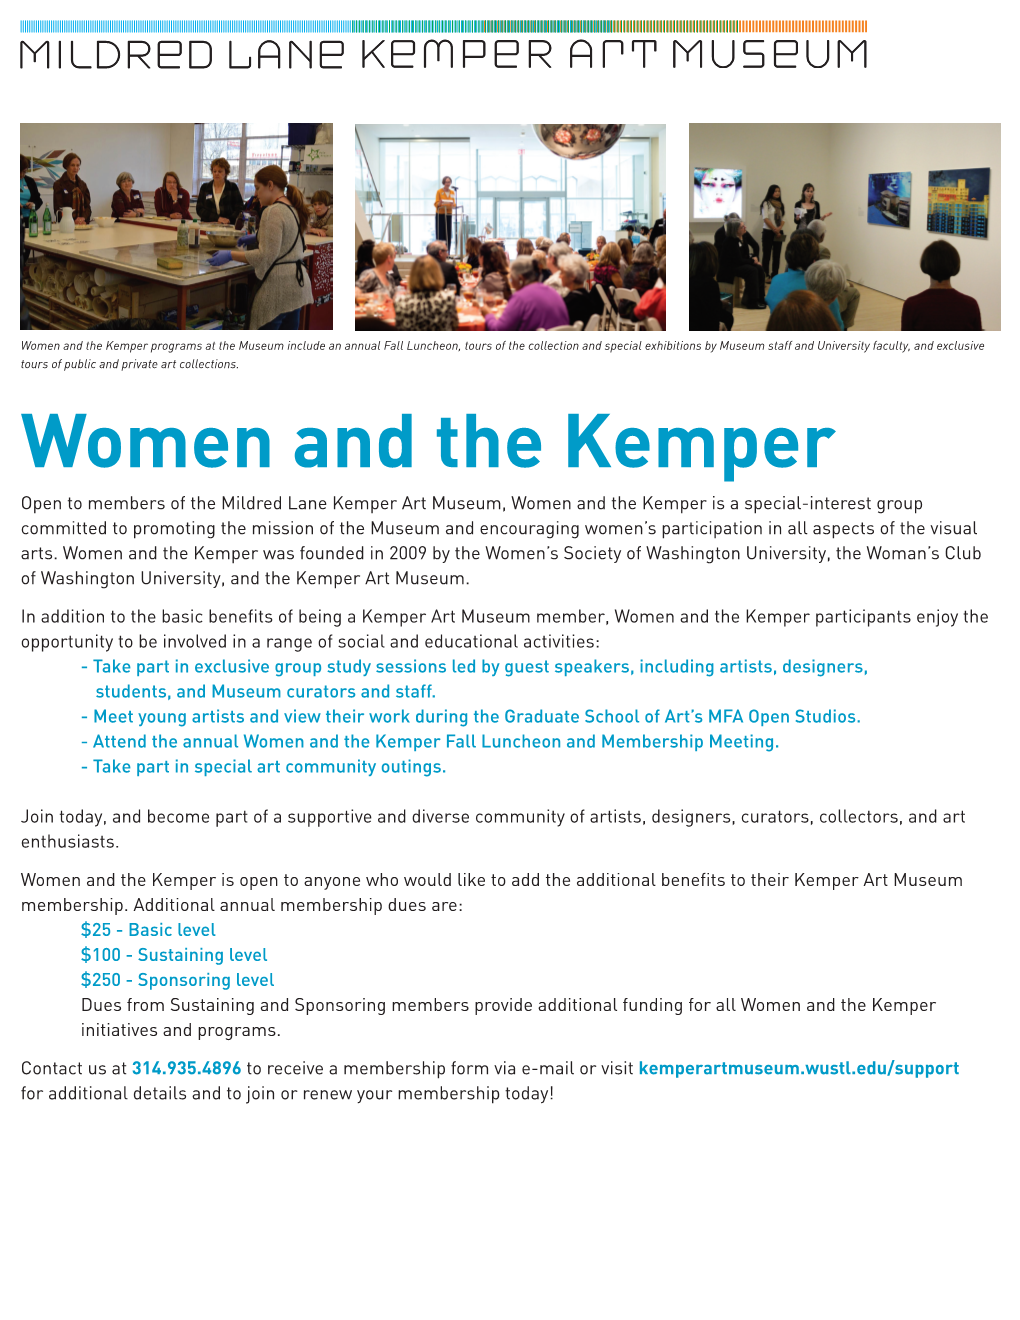 Women and the Kemper